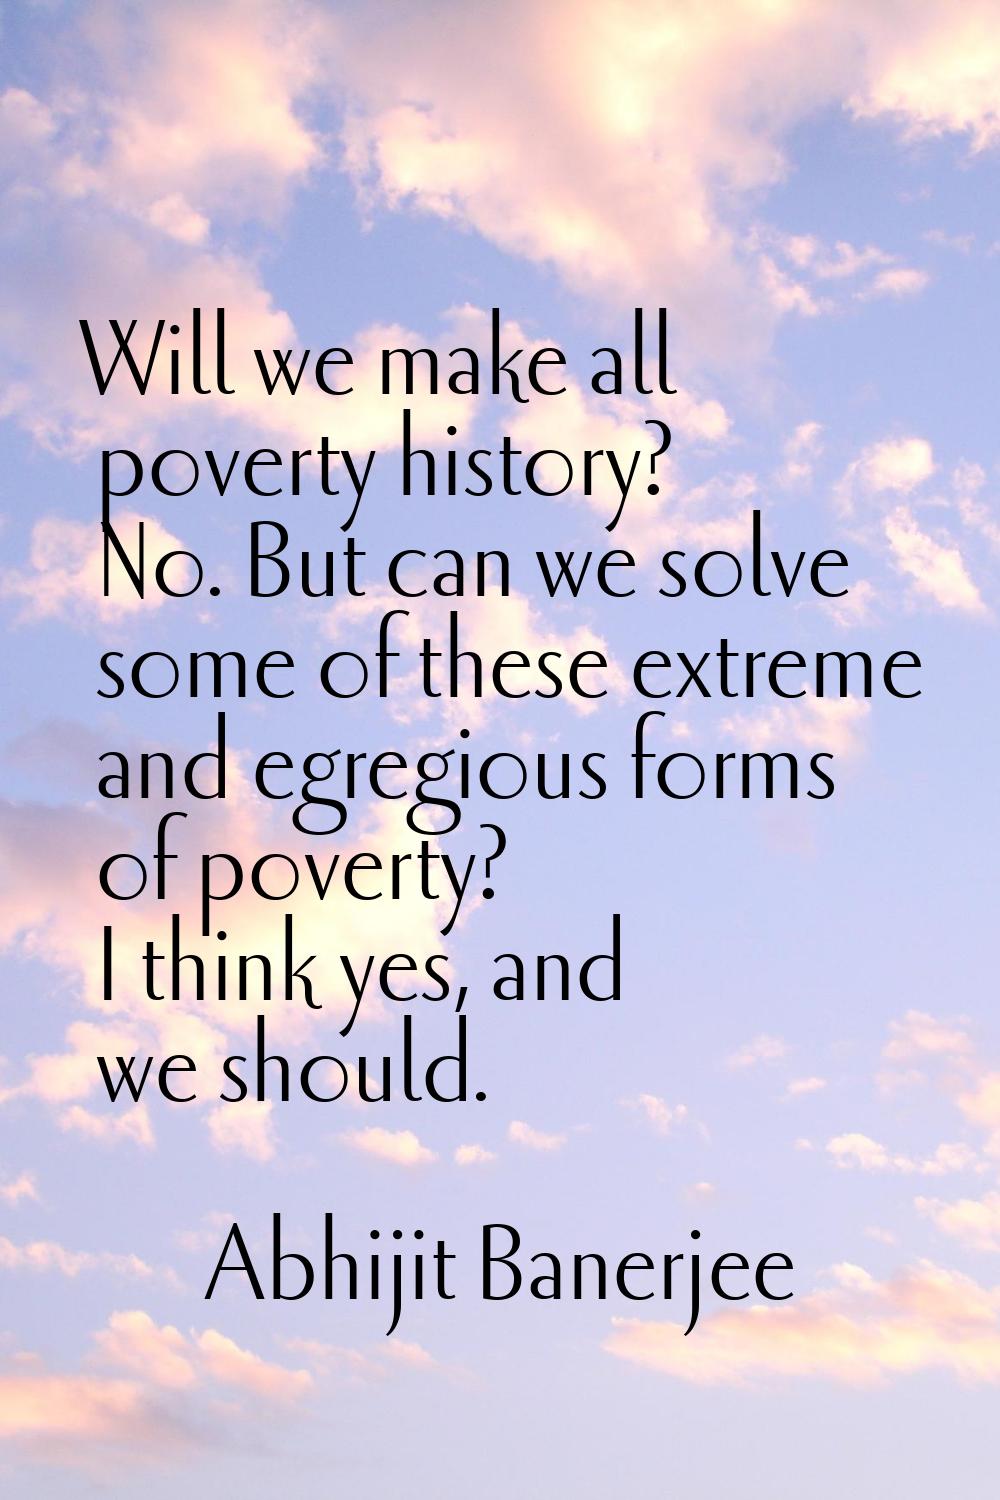 Will we make all poverty history? No. But can we solve some of these extreme and egregious forms of